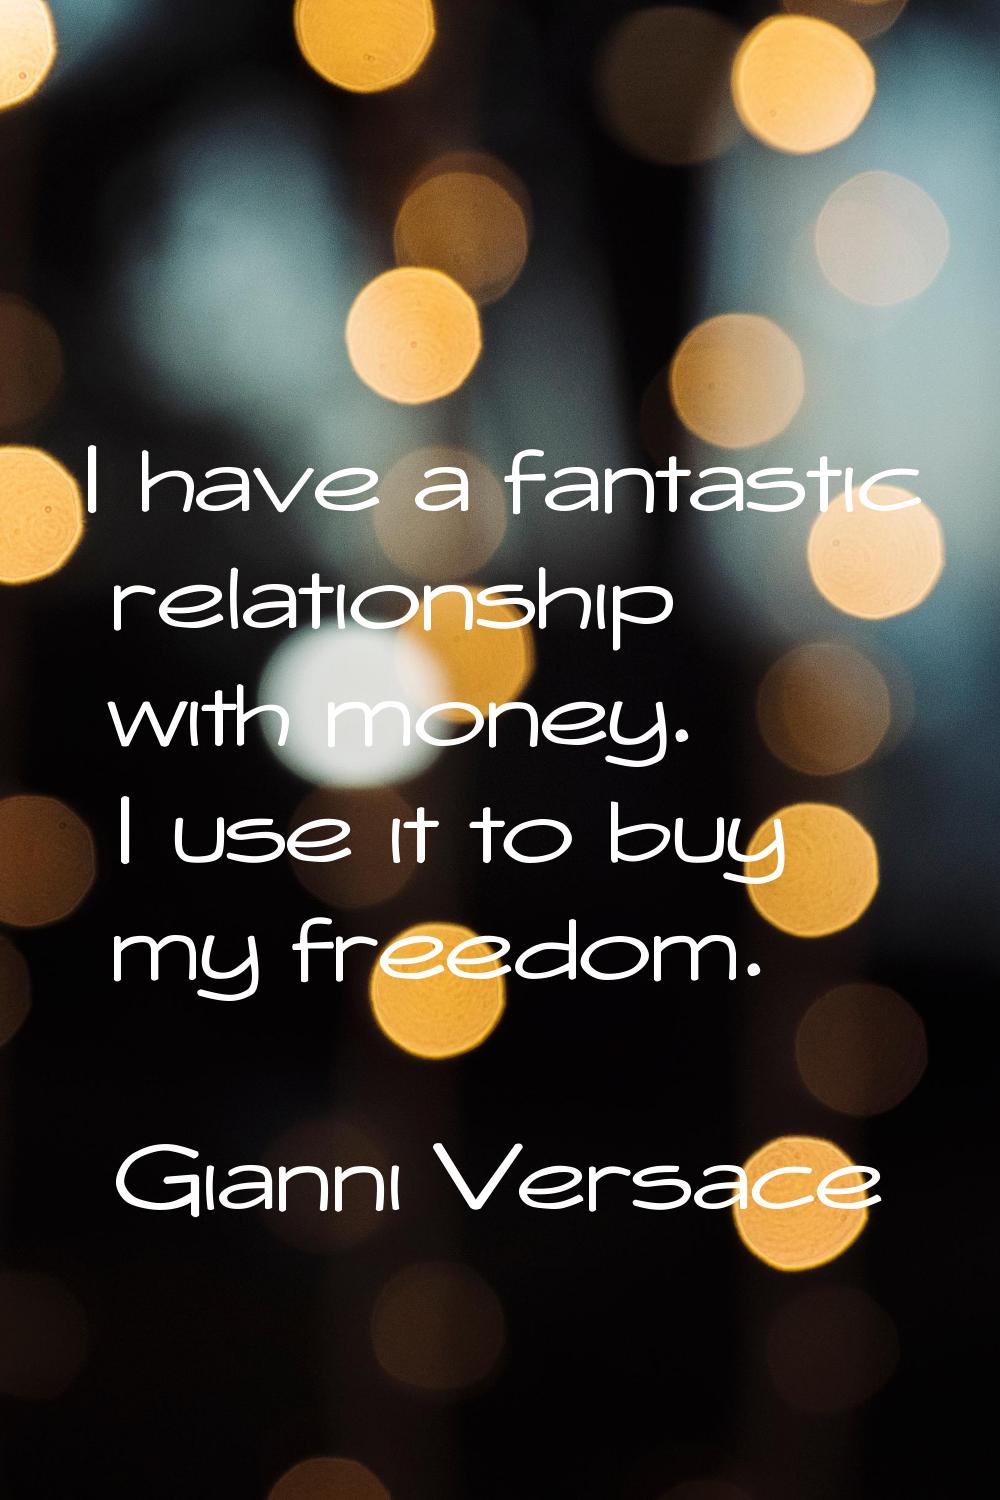 I have a fantastic relationship with money. I use it to buy my freedom.